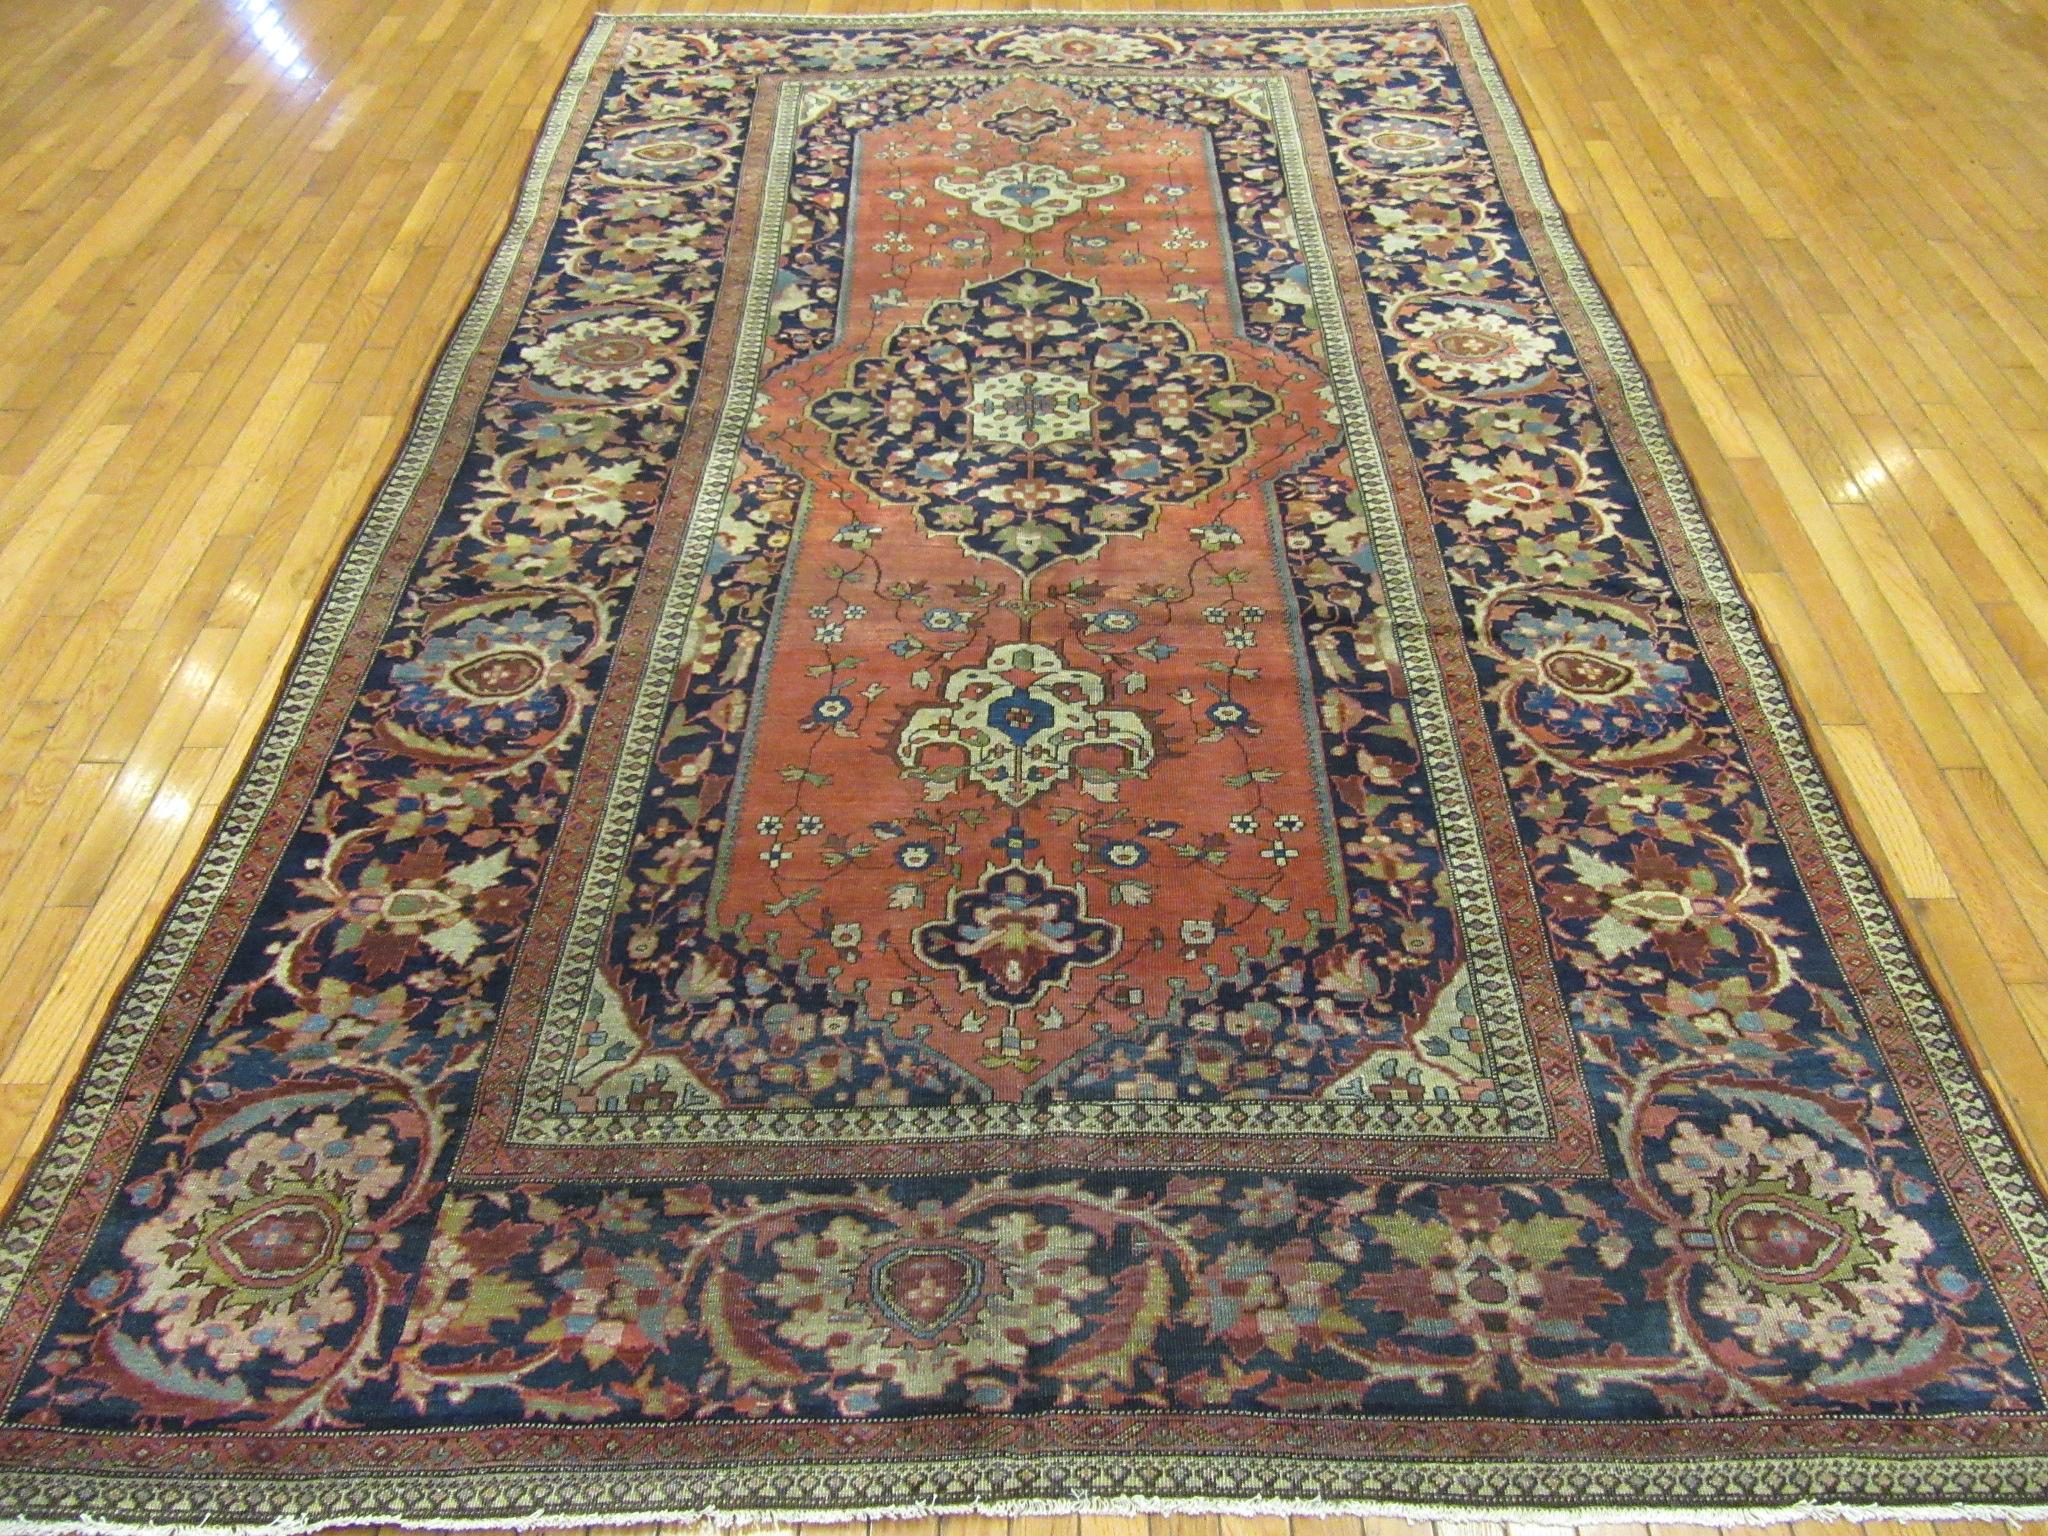 This is an antique hand knotted Persian Sarouk Farahan rug with a Classic traditional central medallion design on a brick red color field and a wide navy border. The rug has a hard to find size of 6' 3” x 10' 8” a perfect rug for a foyer or anywhere